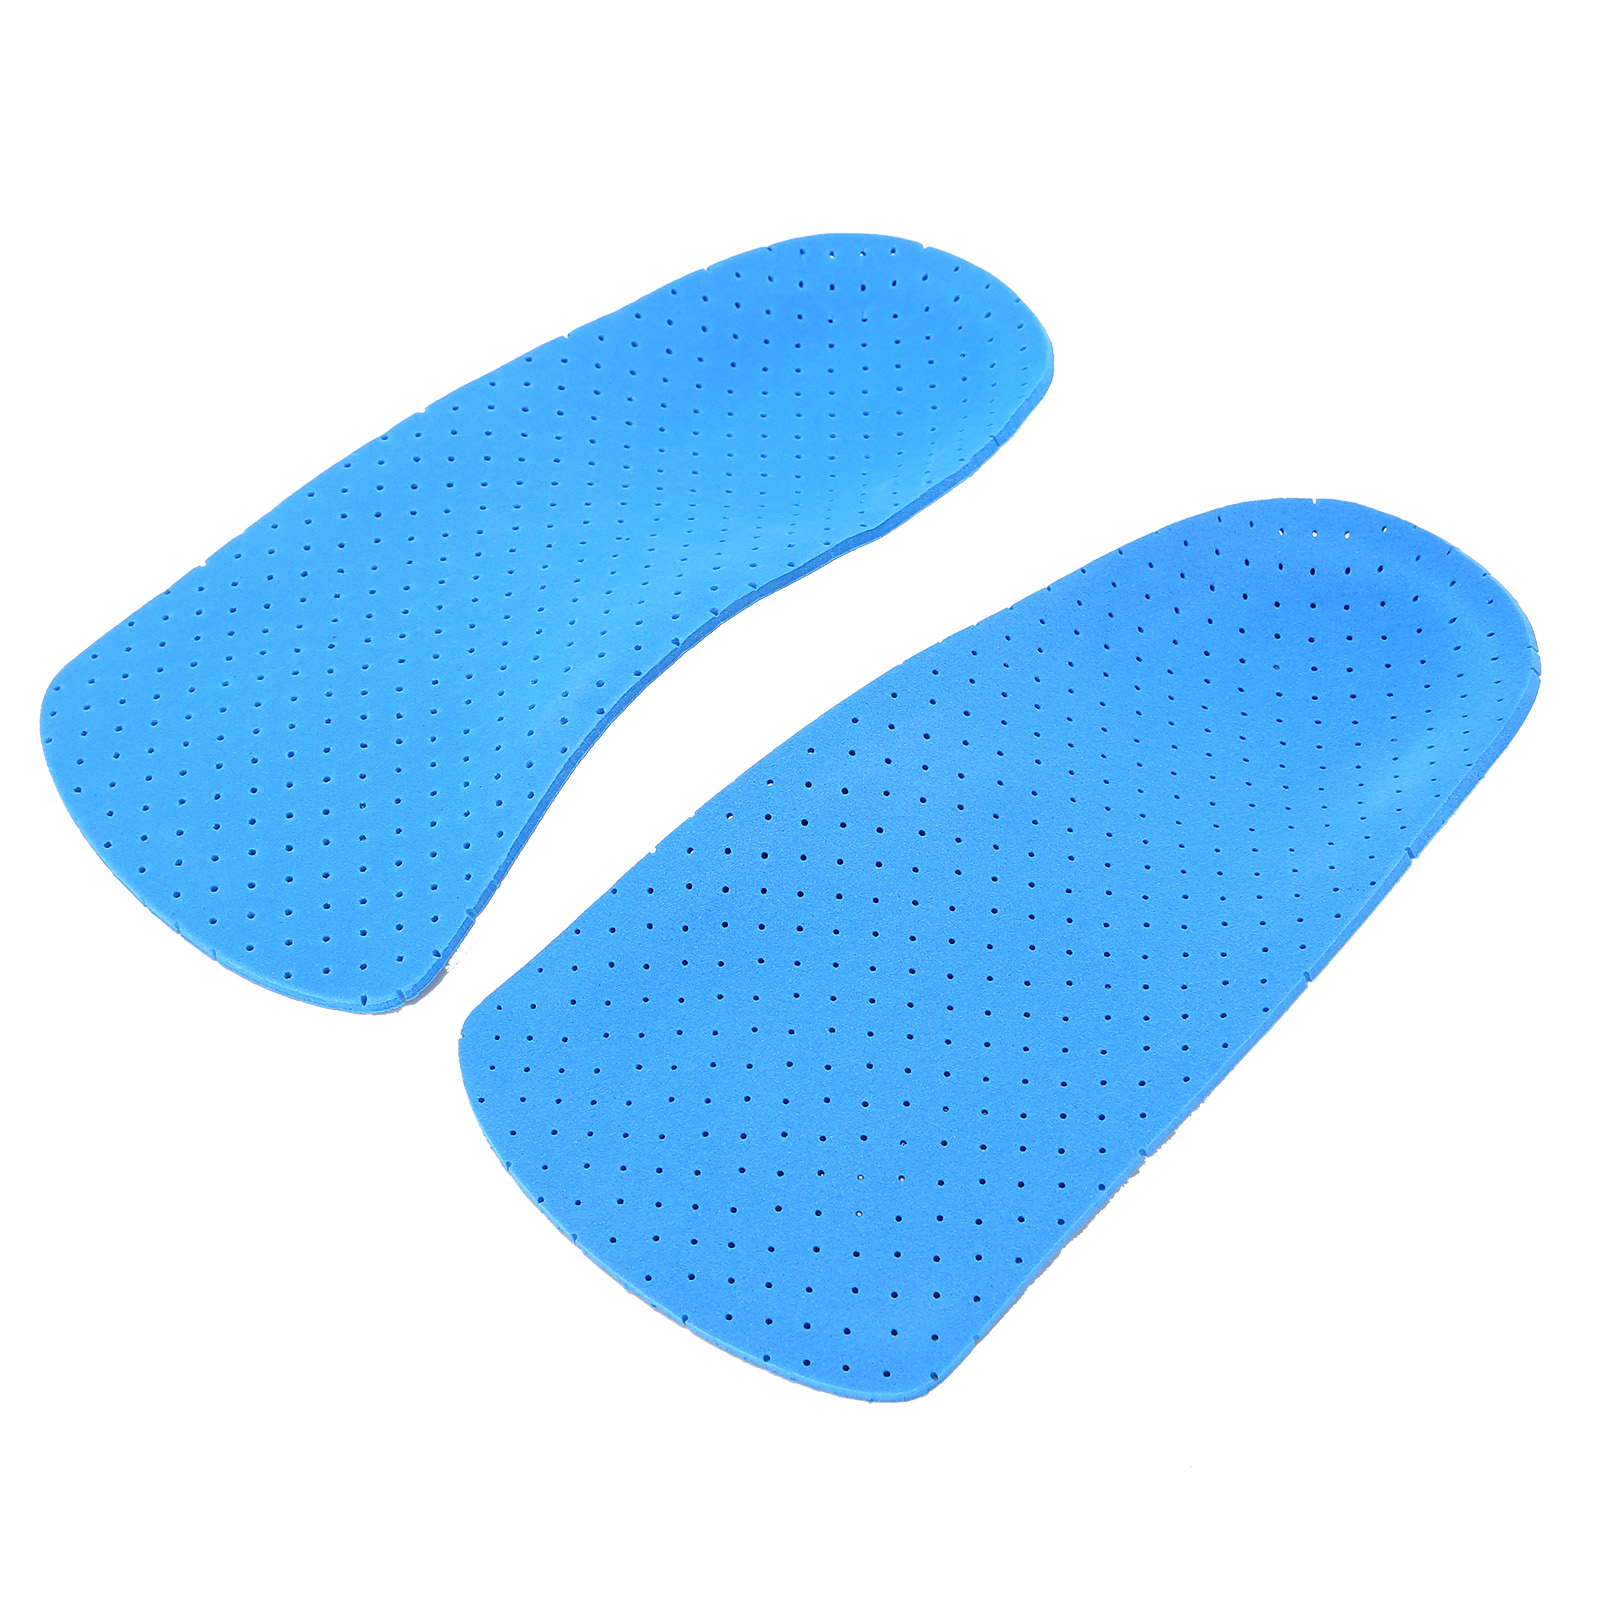 Orthotic Inserts Foot Pain Relief Correction Insoles for Plantar ...